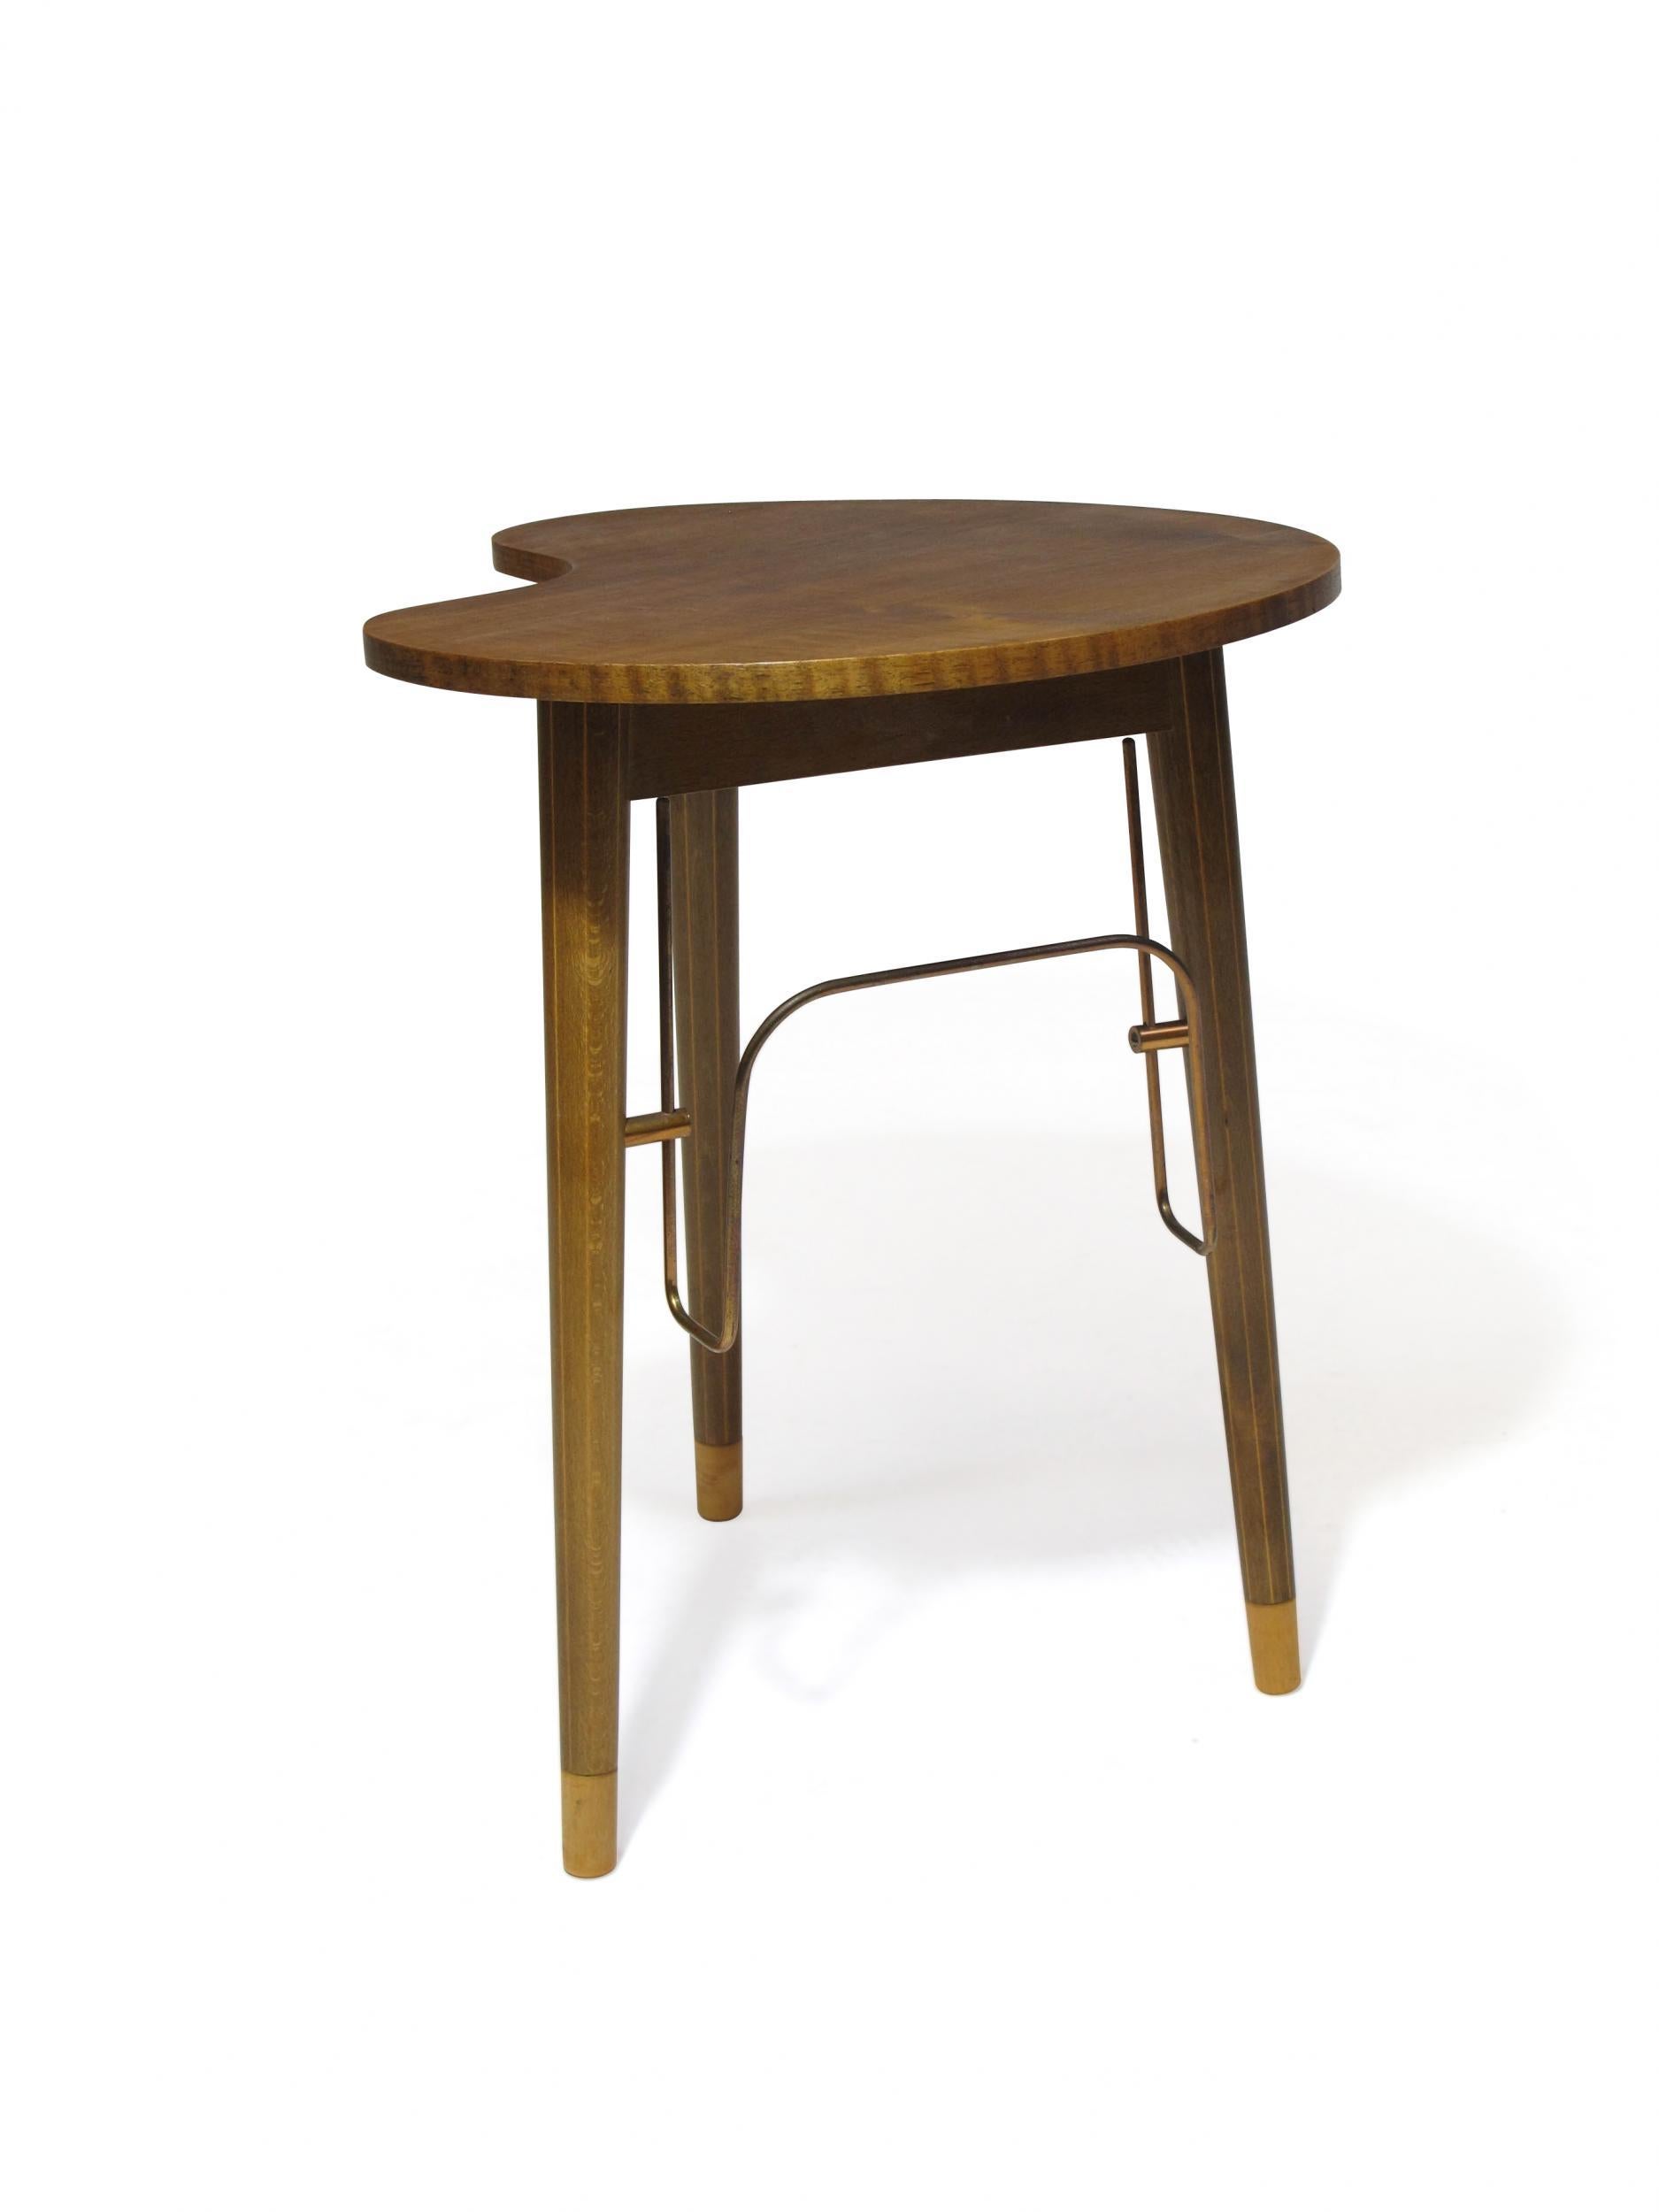 Danish mid century side table designed by Edmund Jørgensen for Gorm Moblefabrik, circa 1950 Denmark. The side table crafted of walnut top with a copper magazine holder, hidden ashtray, raised on tapered legs.